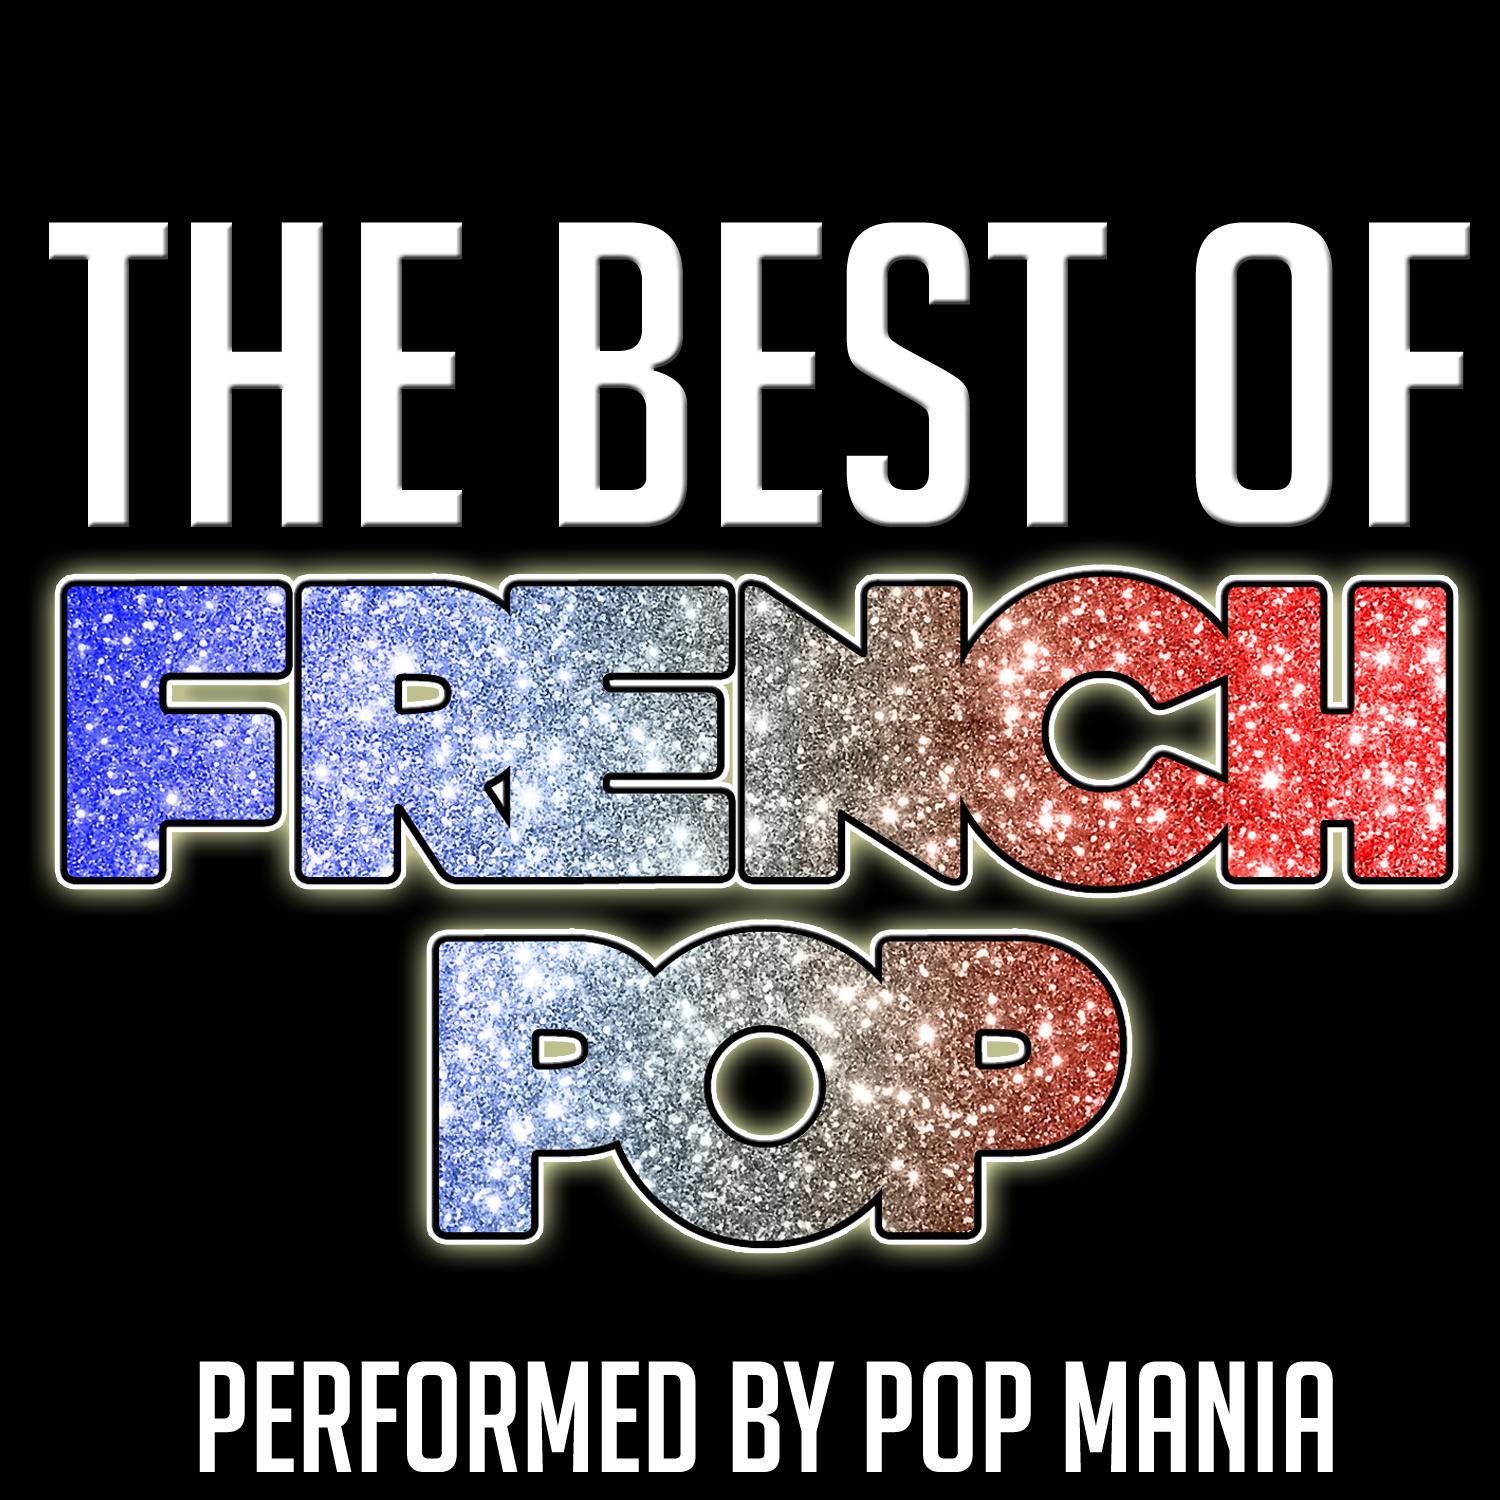 The Best of French Pop